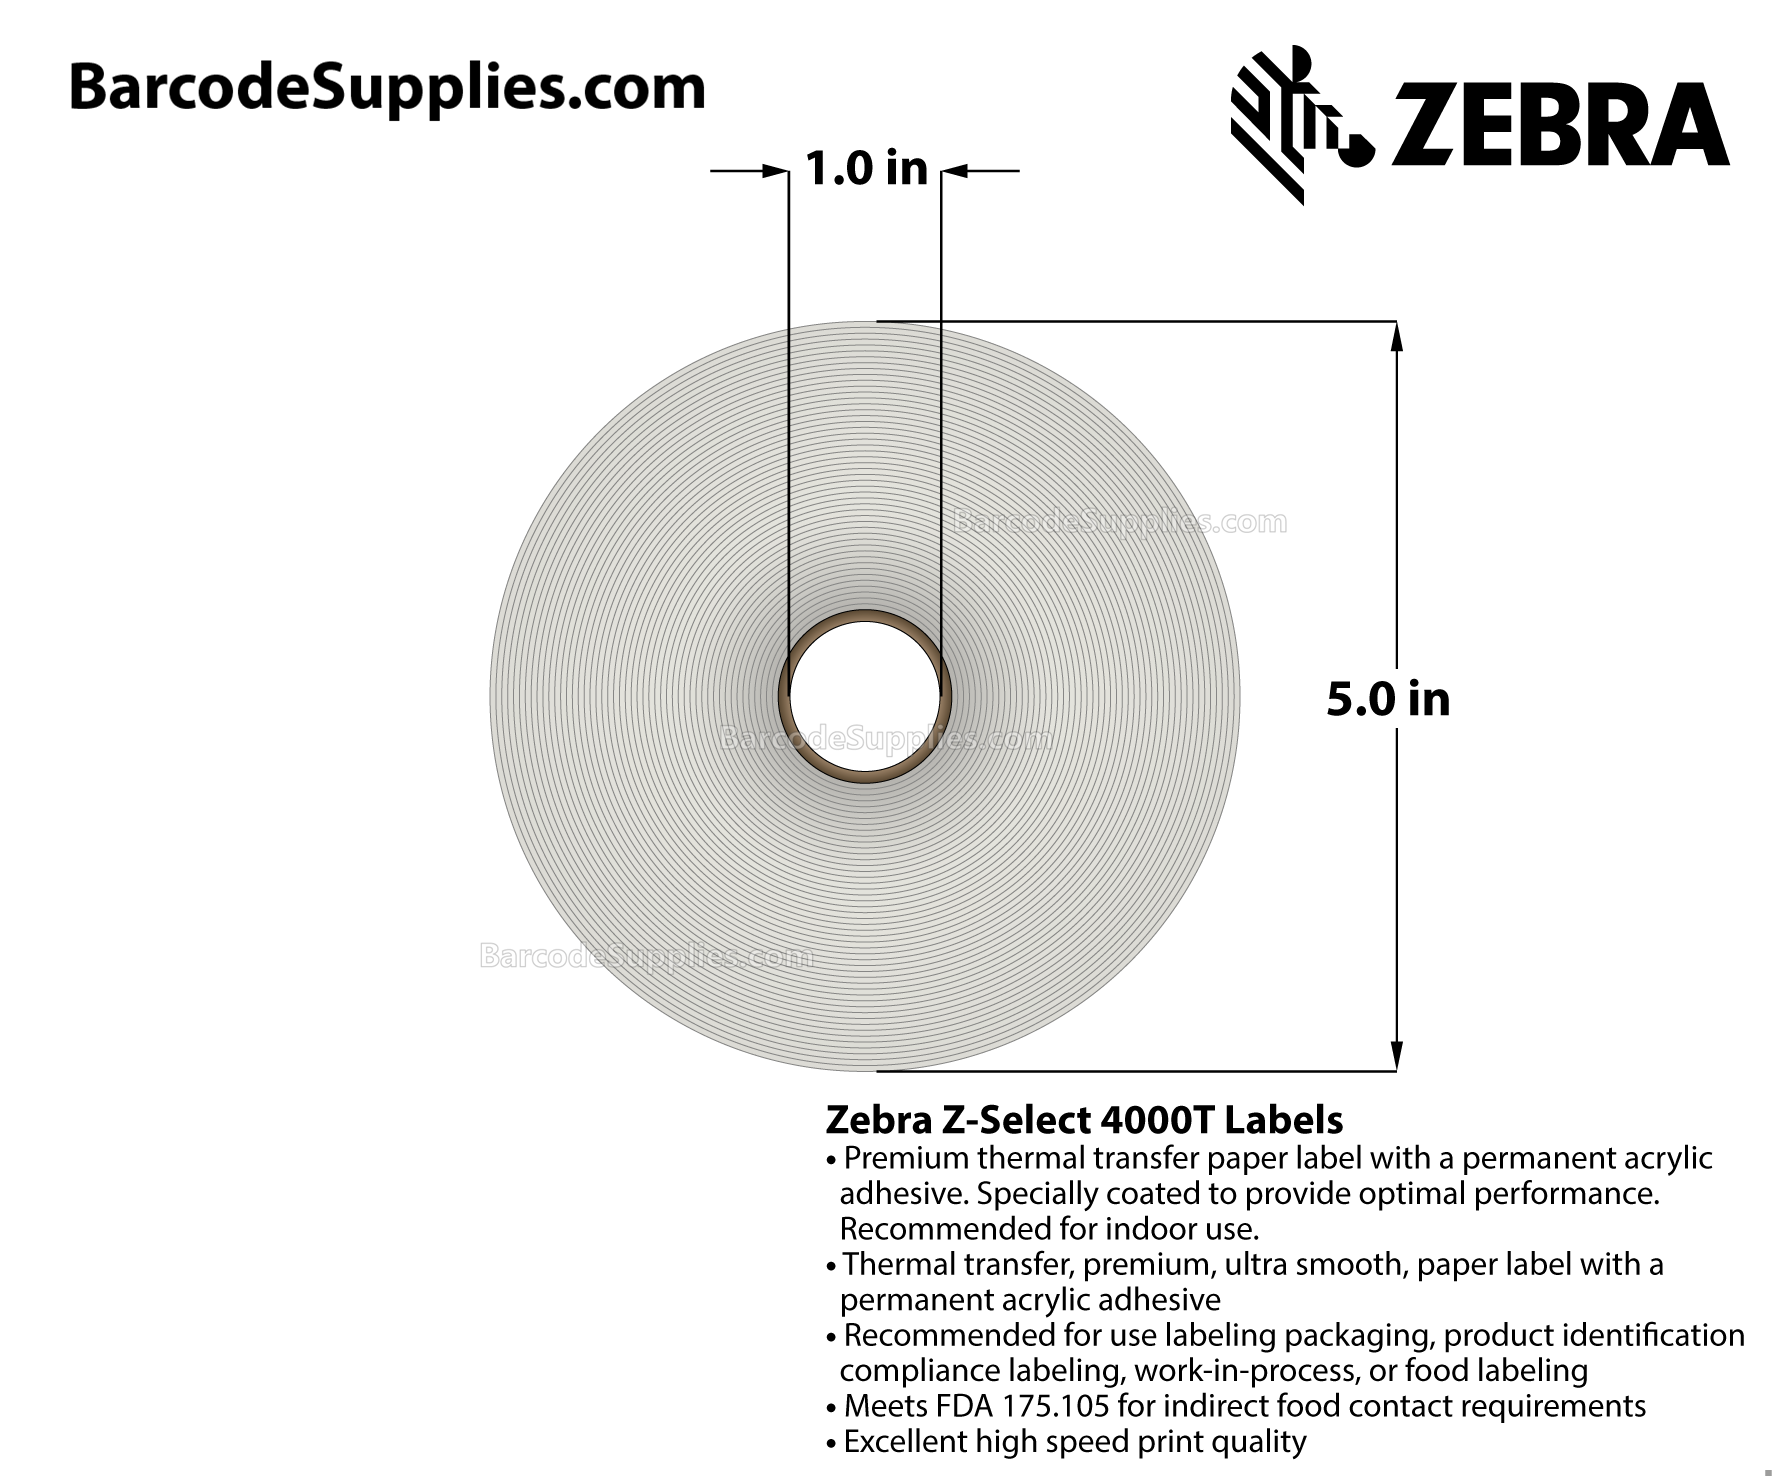 2.38 x 1 Thermal Transfer White Z-Select 4000T Labels With Permanent Adhesive - Labels have center vertical slit creating two 1.1875" x 1" labels - Perforated - 2580 Labels Per Roll - Carton Of 6 Rolls - 15480 Labels Total - MPN: 10005848